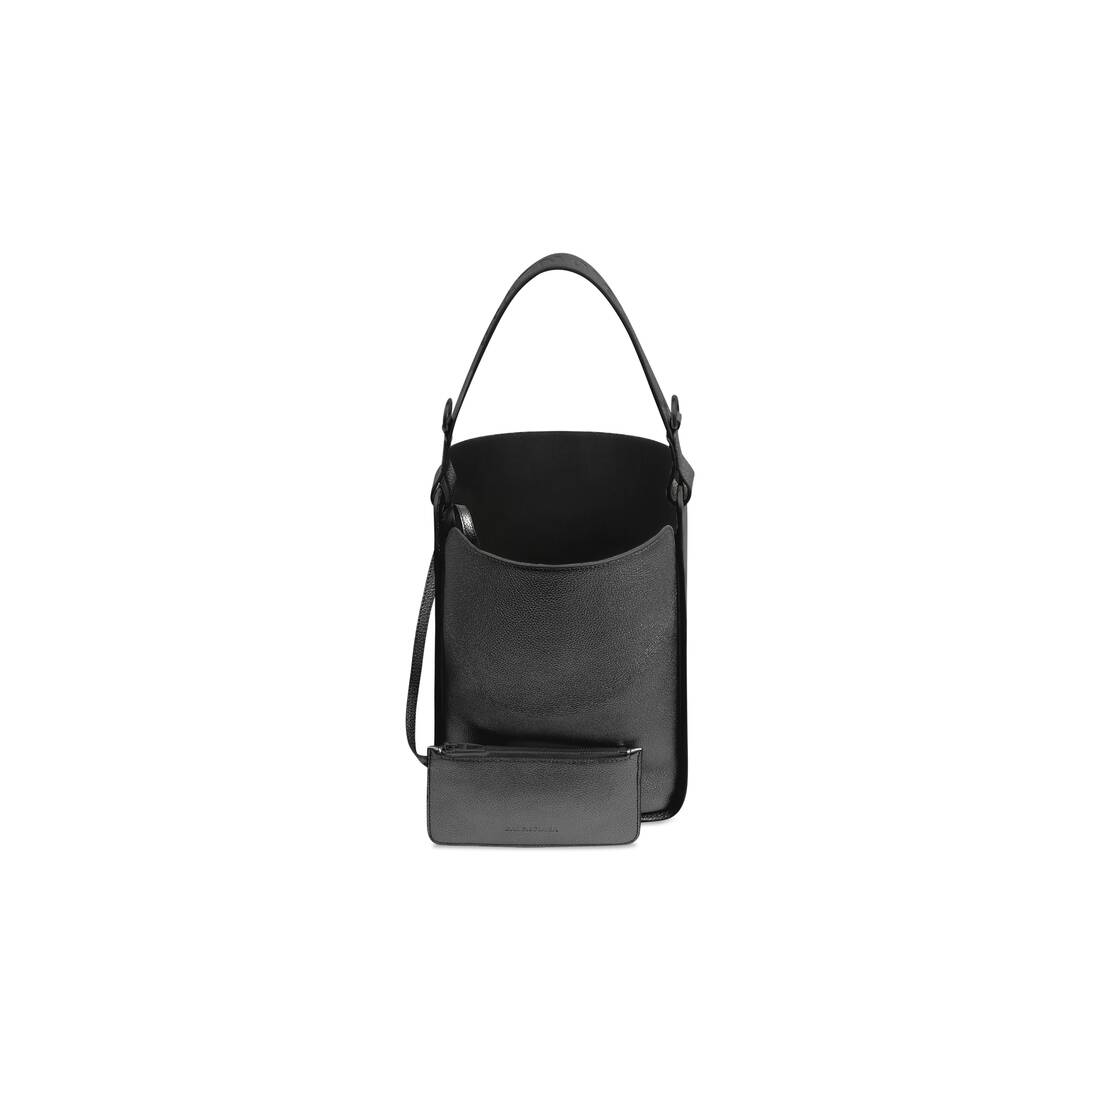 Women's Tool 2.0 Medium North-south Tote in Black/white